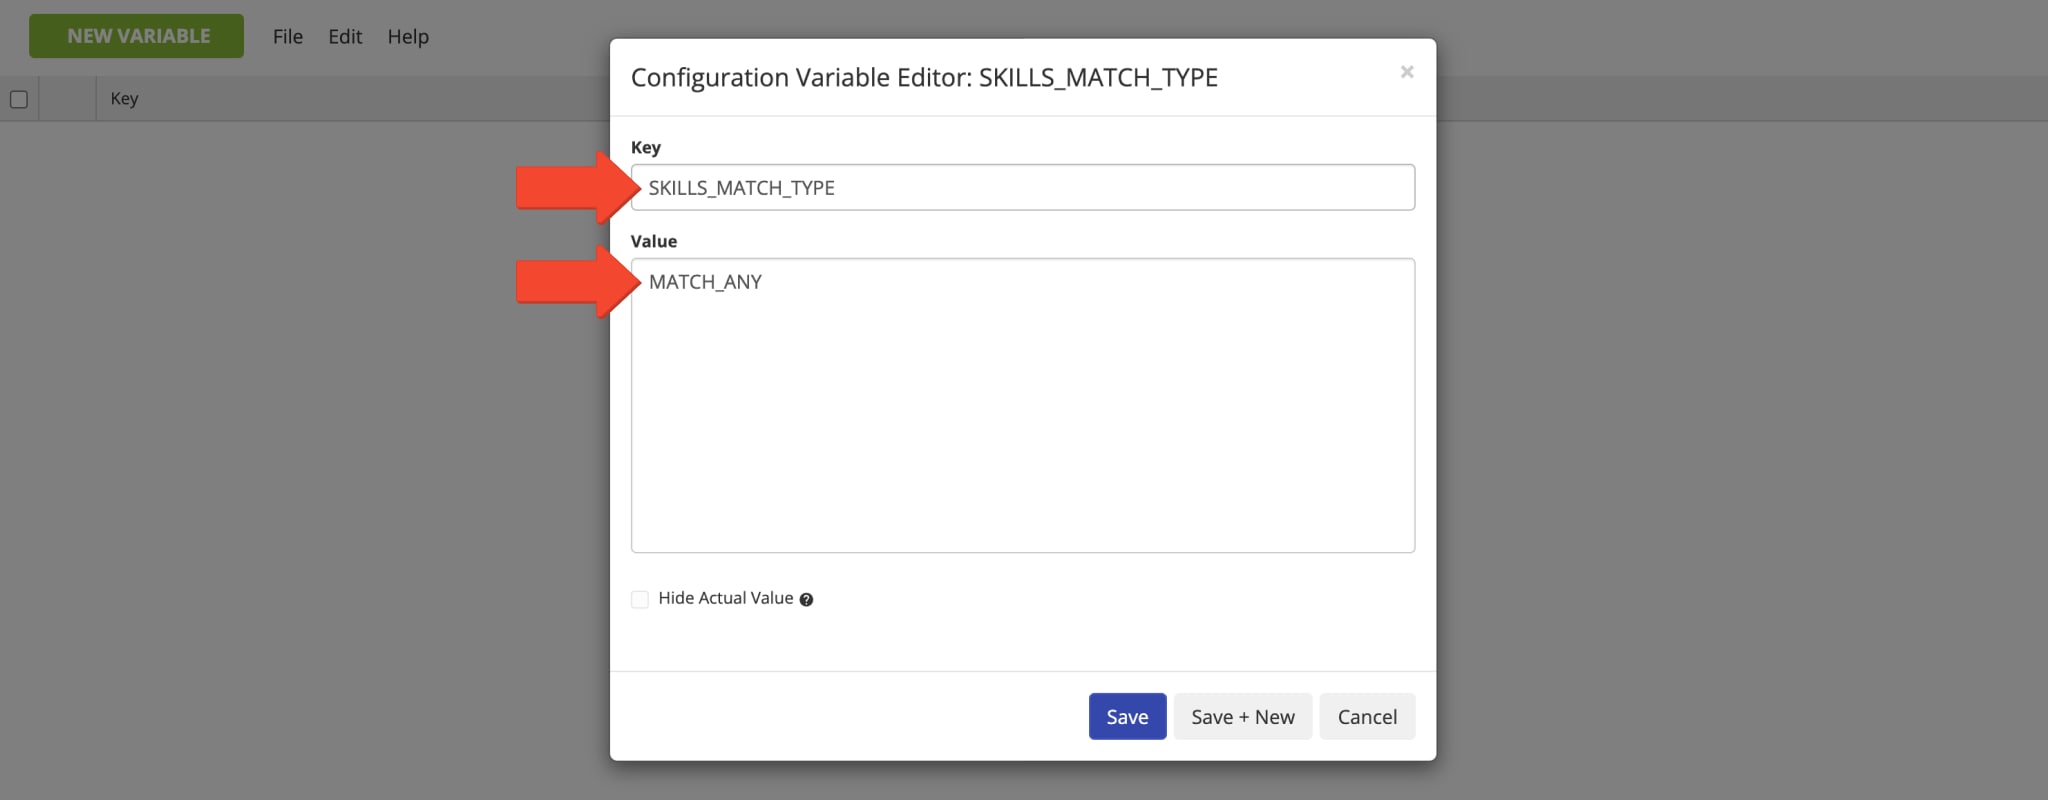 Configure your preferred Skills Matching Type with the Advanced Configuration Editor.